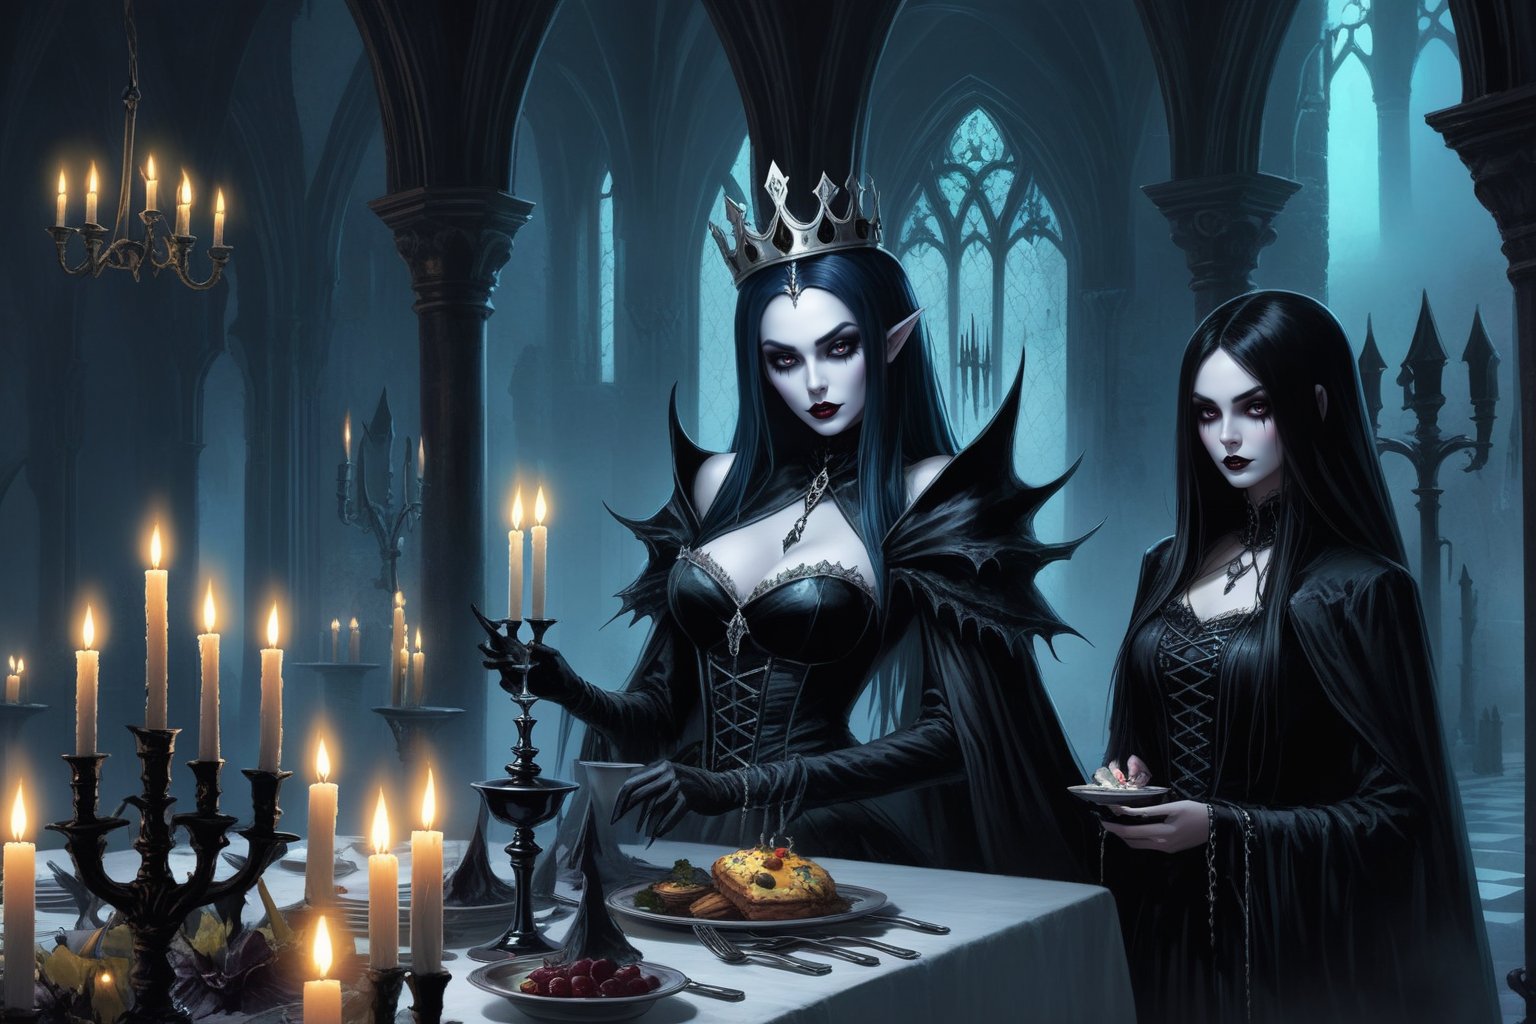  A hauntingly beautiful undead queen monster has diner with her monsters guests in a gothic castle. candles light.